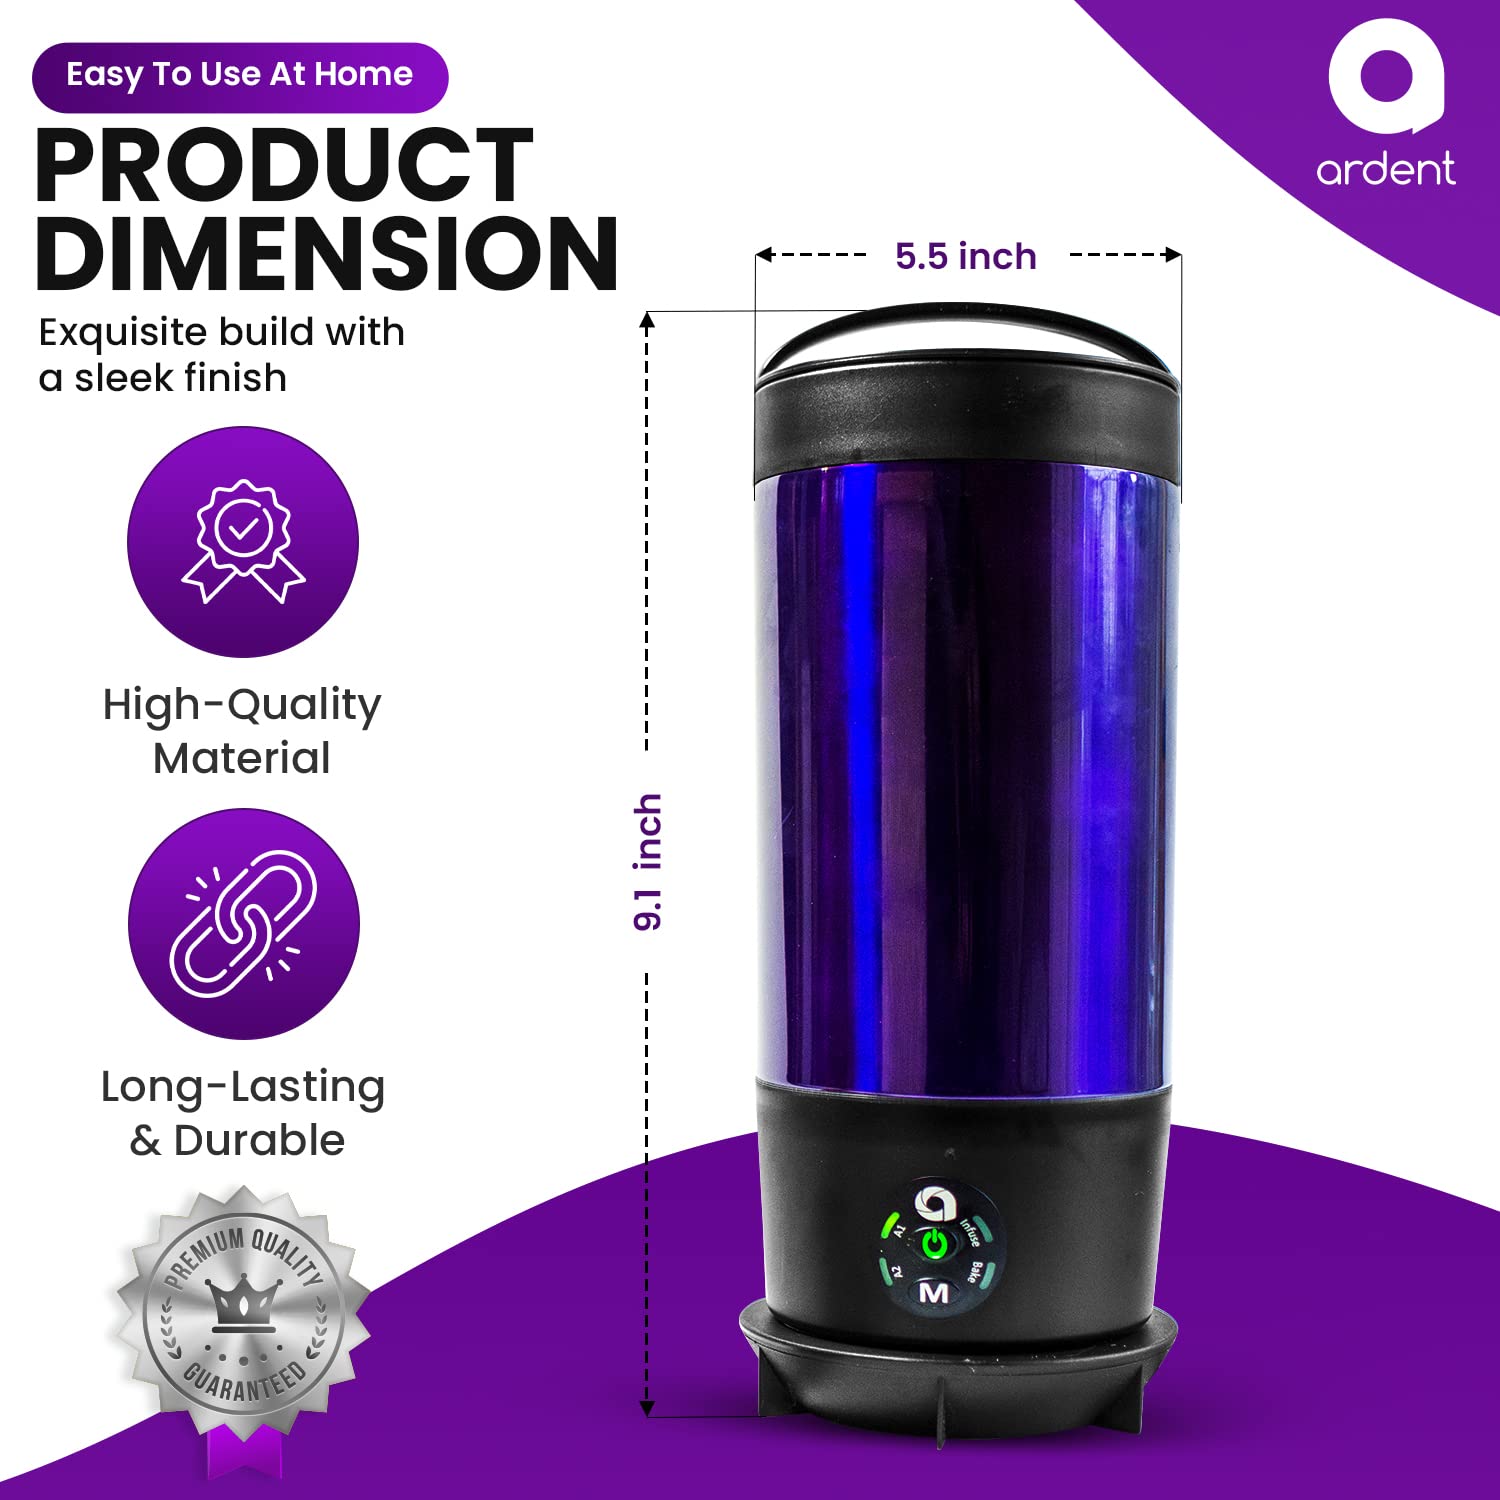 Ardent FX Decarboxylator 110V With Bluetooth Connectivity - 3 in 1 Portable Decarboxylation - Herbal & Oil Infuser Machine - Quick & Effortless Decarboxylation - Odorless - Use for Butter and Herbs